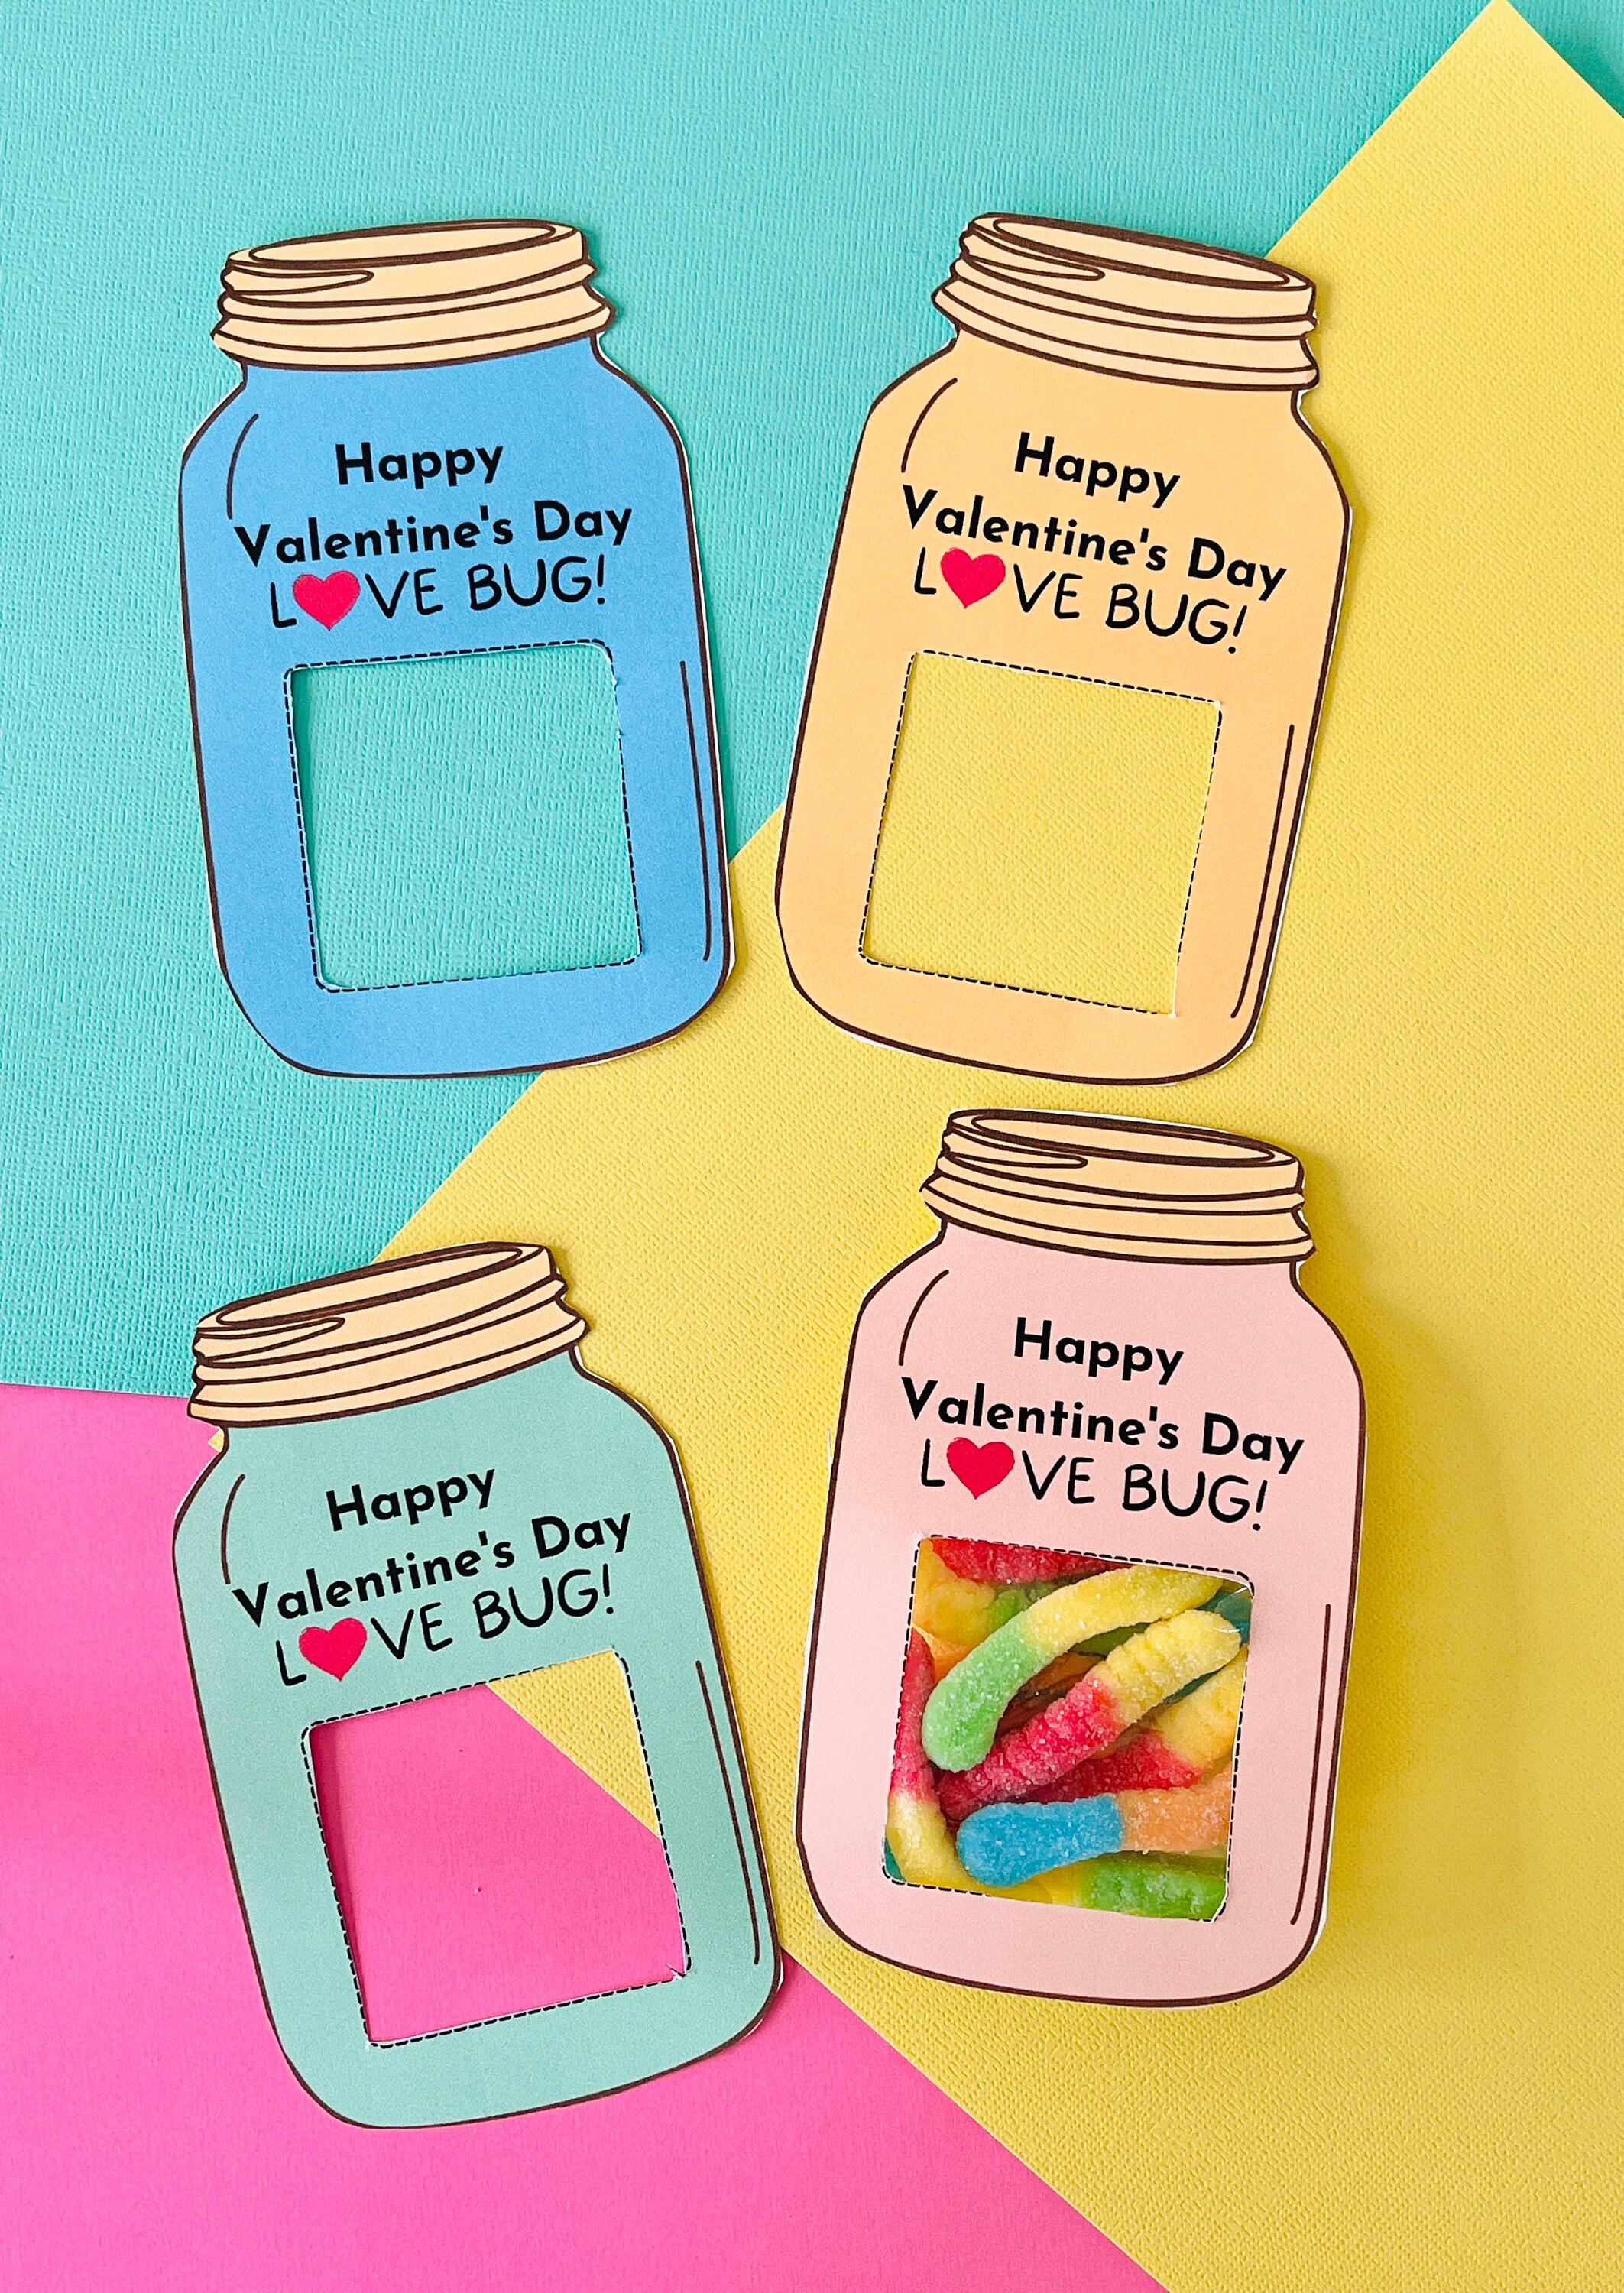 Paper Valentine's Crafts Kids Think Are Cute - Hands On As We Grow®